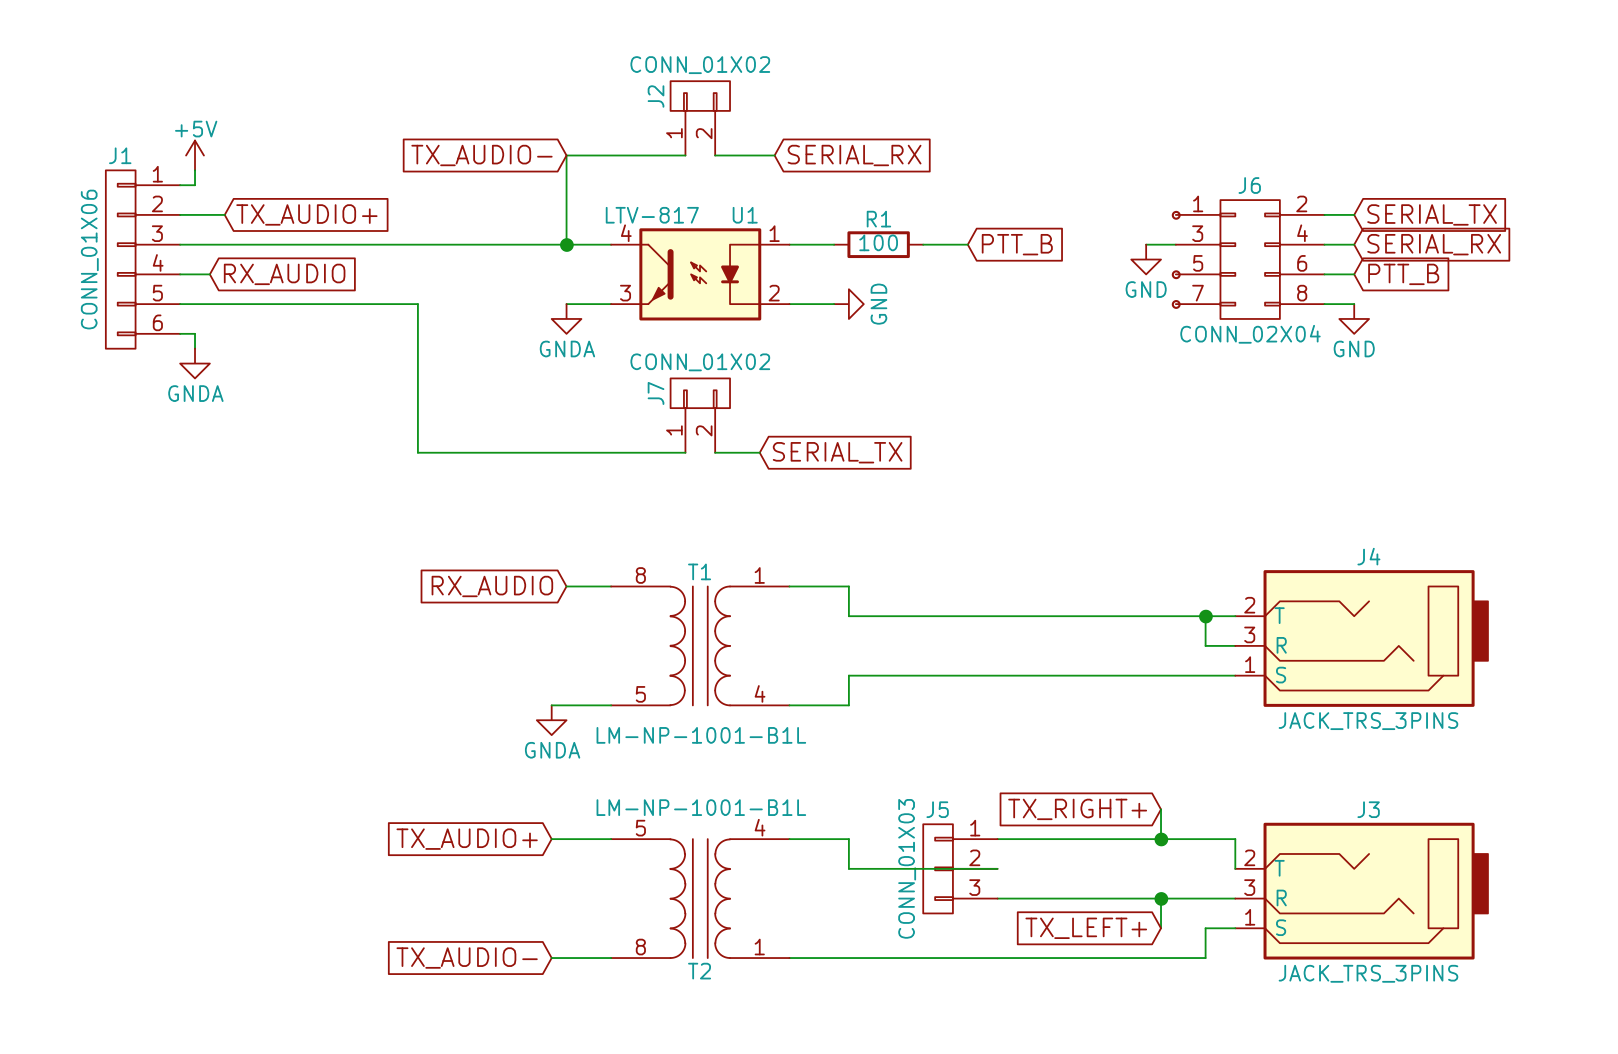 Baofeng interface schematic